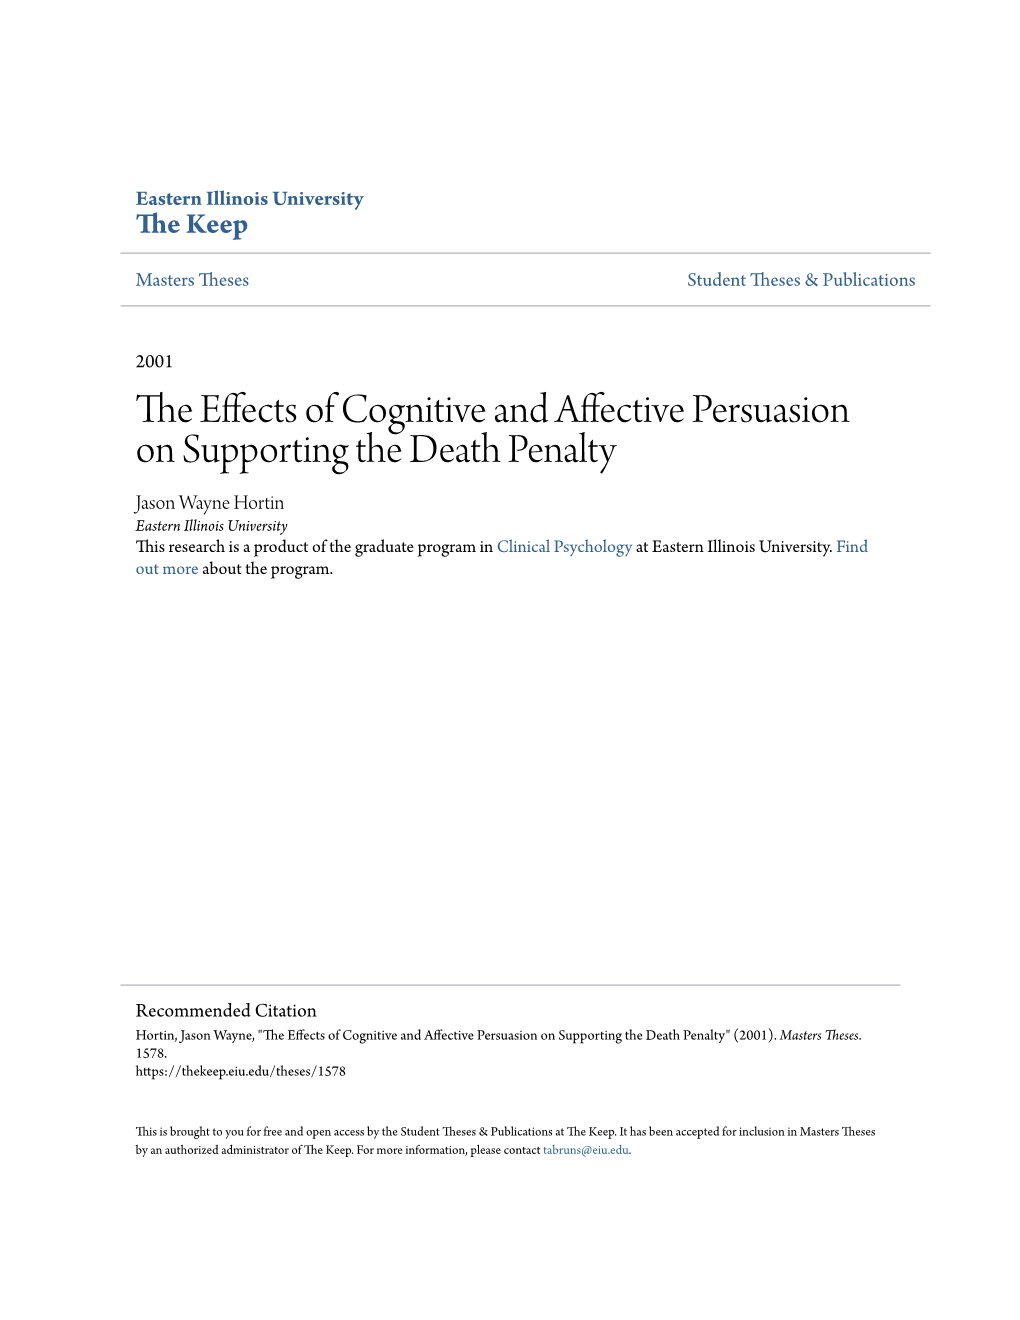 The Effects of Cognitive and Affective Persuasion on Supporting the Death Penalty" (2001)